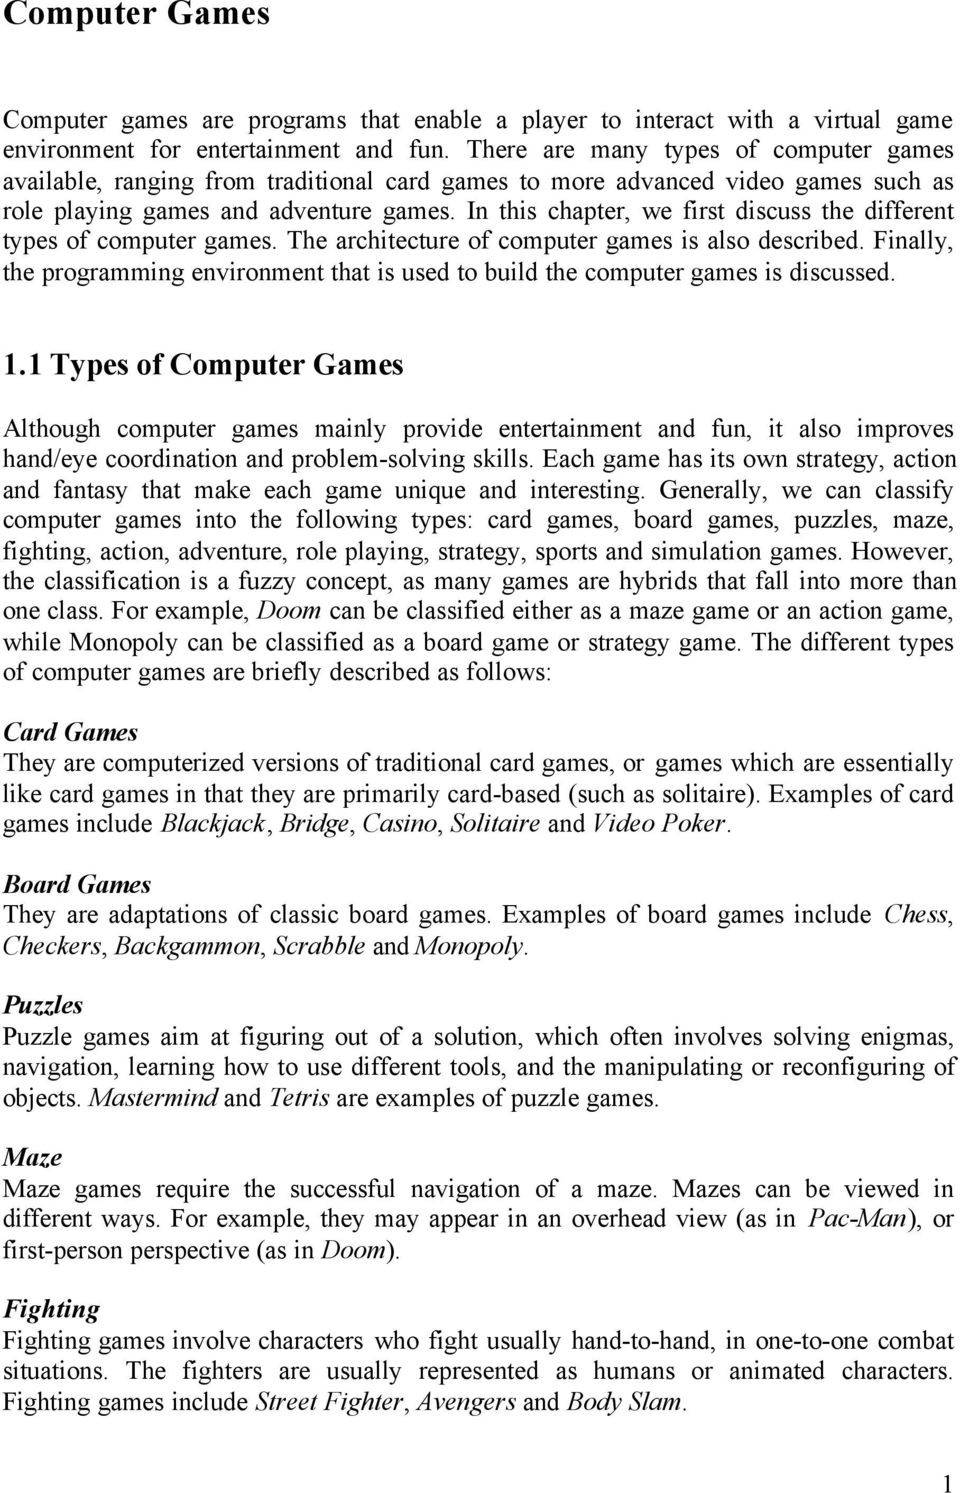 In this chapter, we first discuss the different types of computer games. The architecture of computer games is also described.